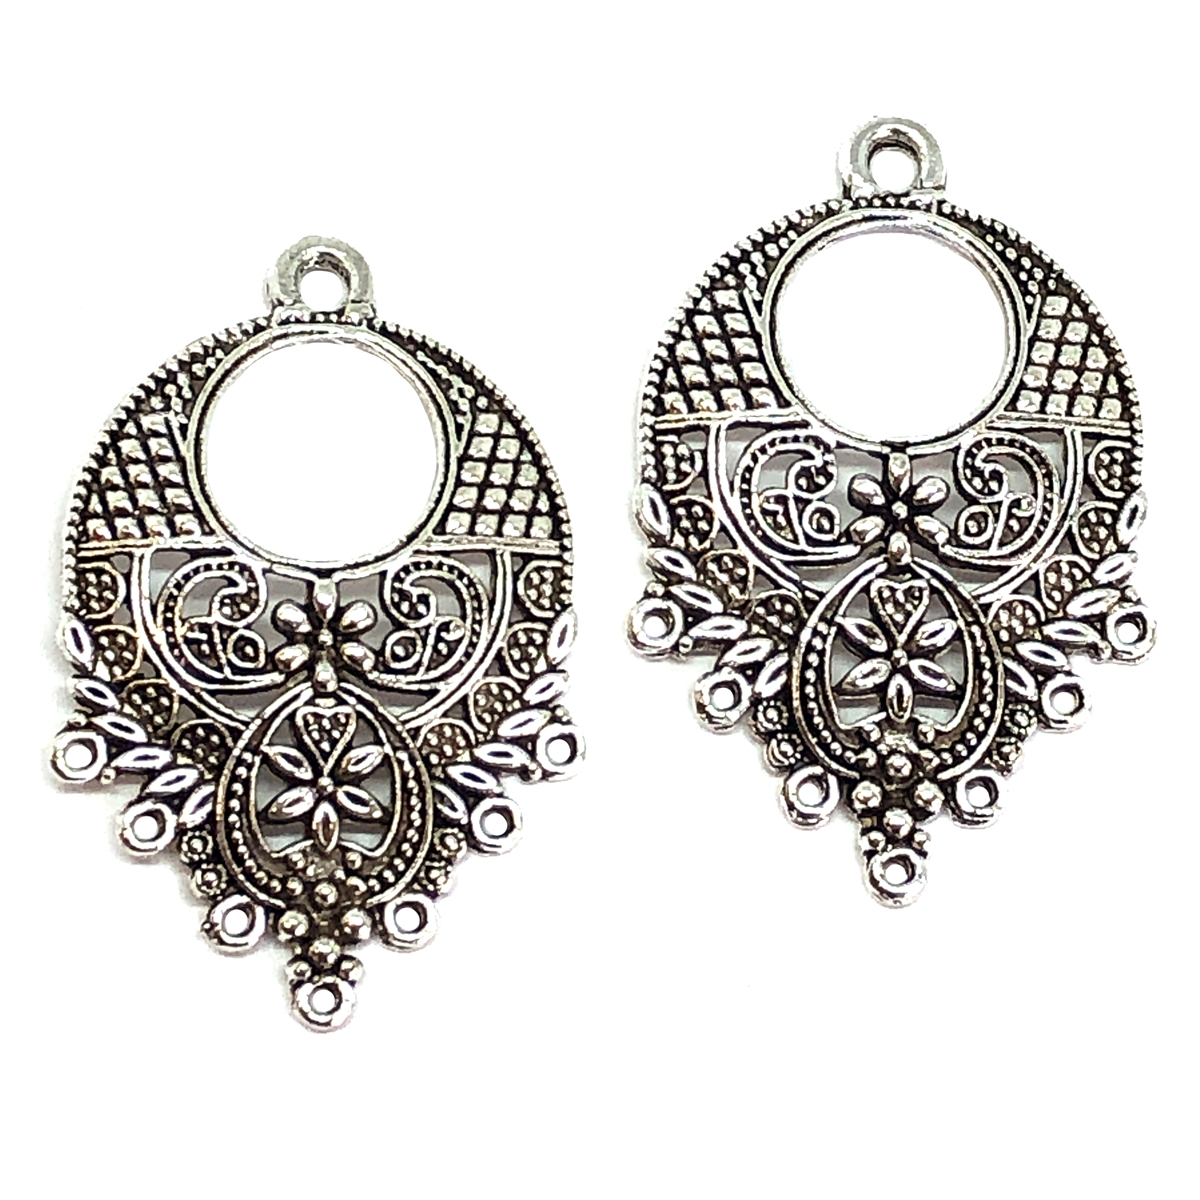 Earring, glass and antique silver-finished pewter (zinc-based